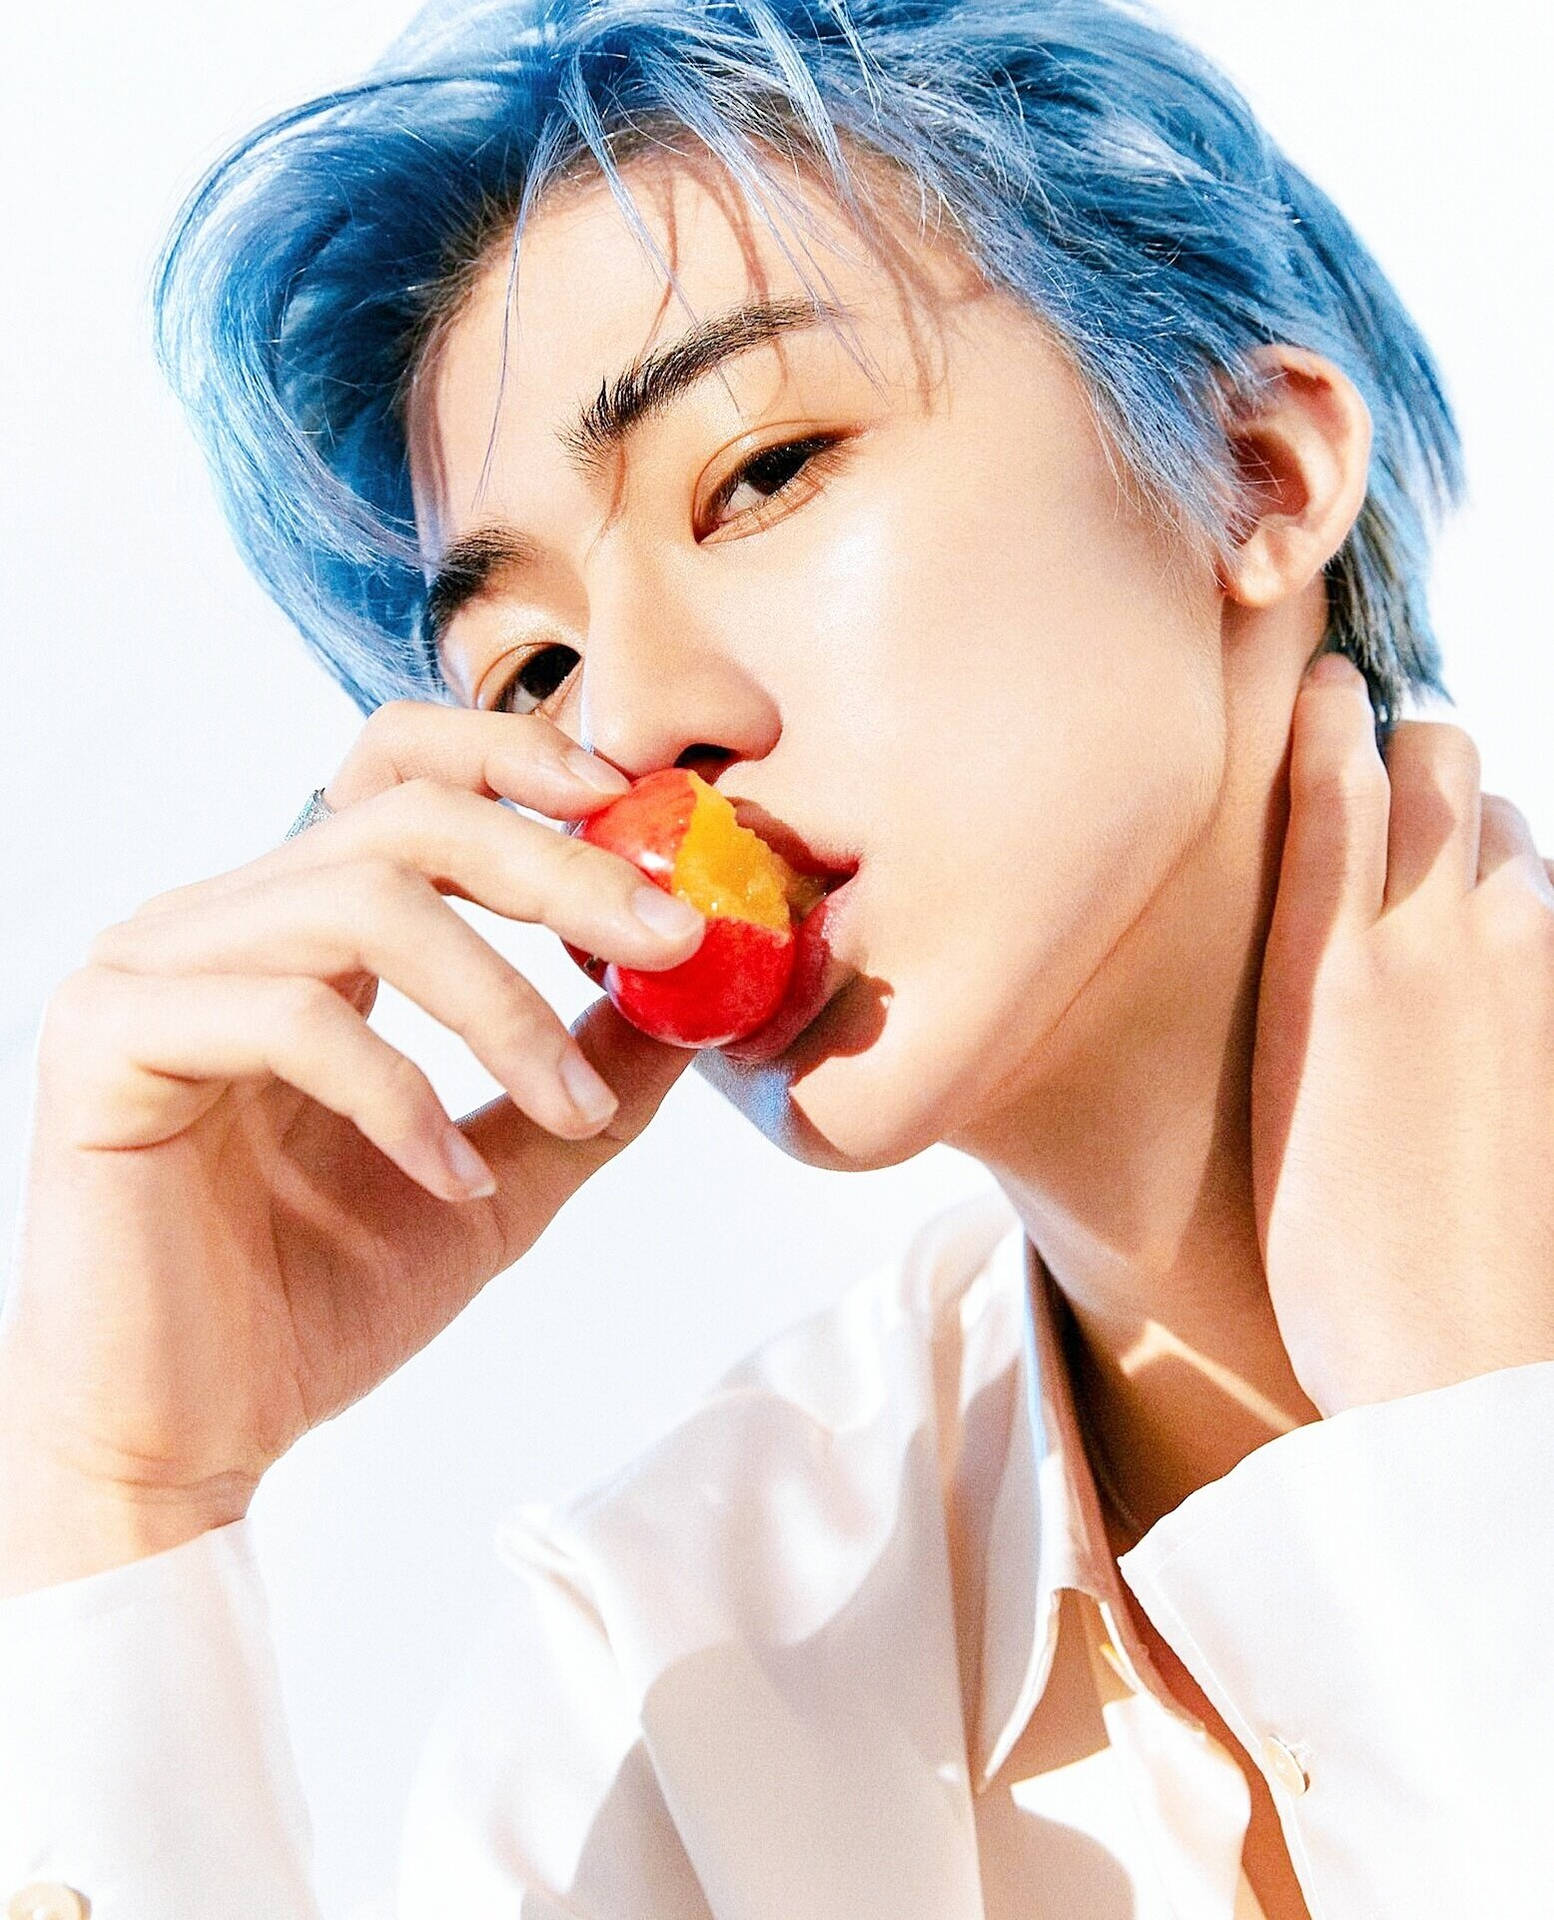 Jaemin Nct With Fruit